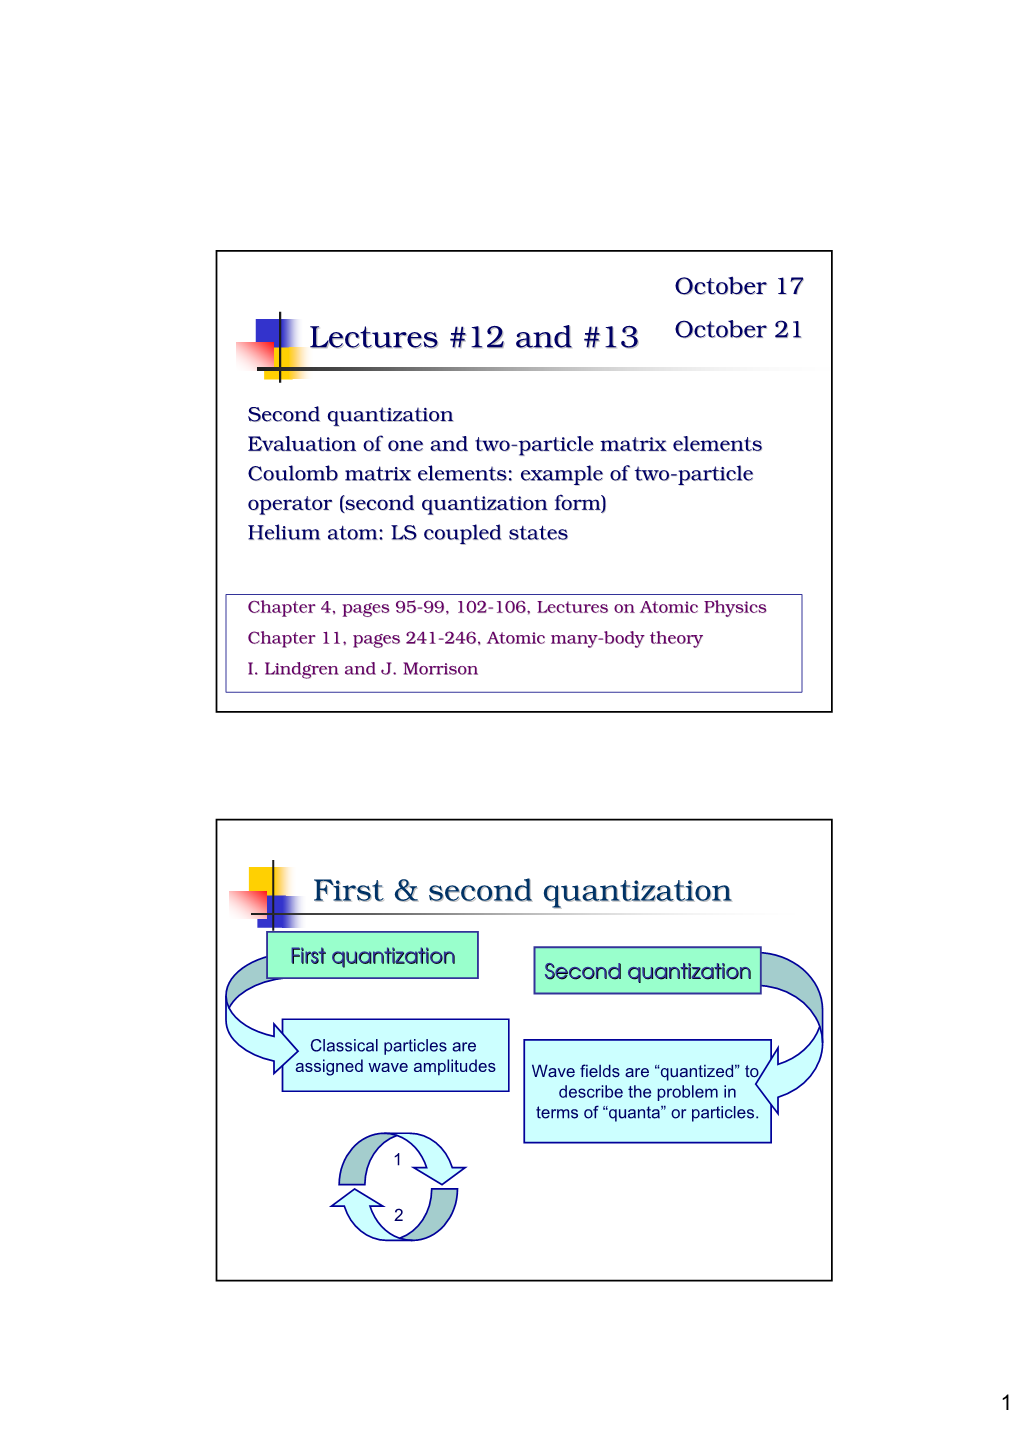 Lectures #12 and #13 First & Second Quantization